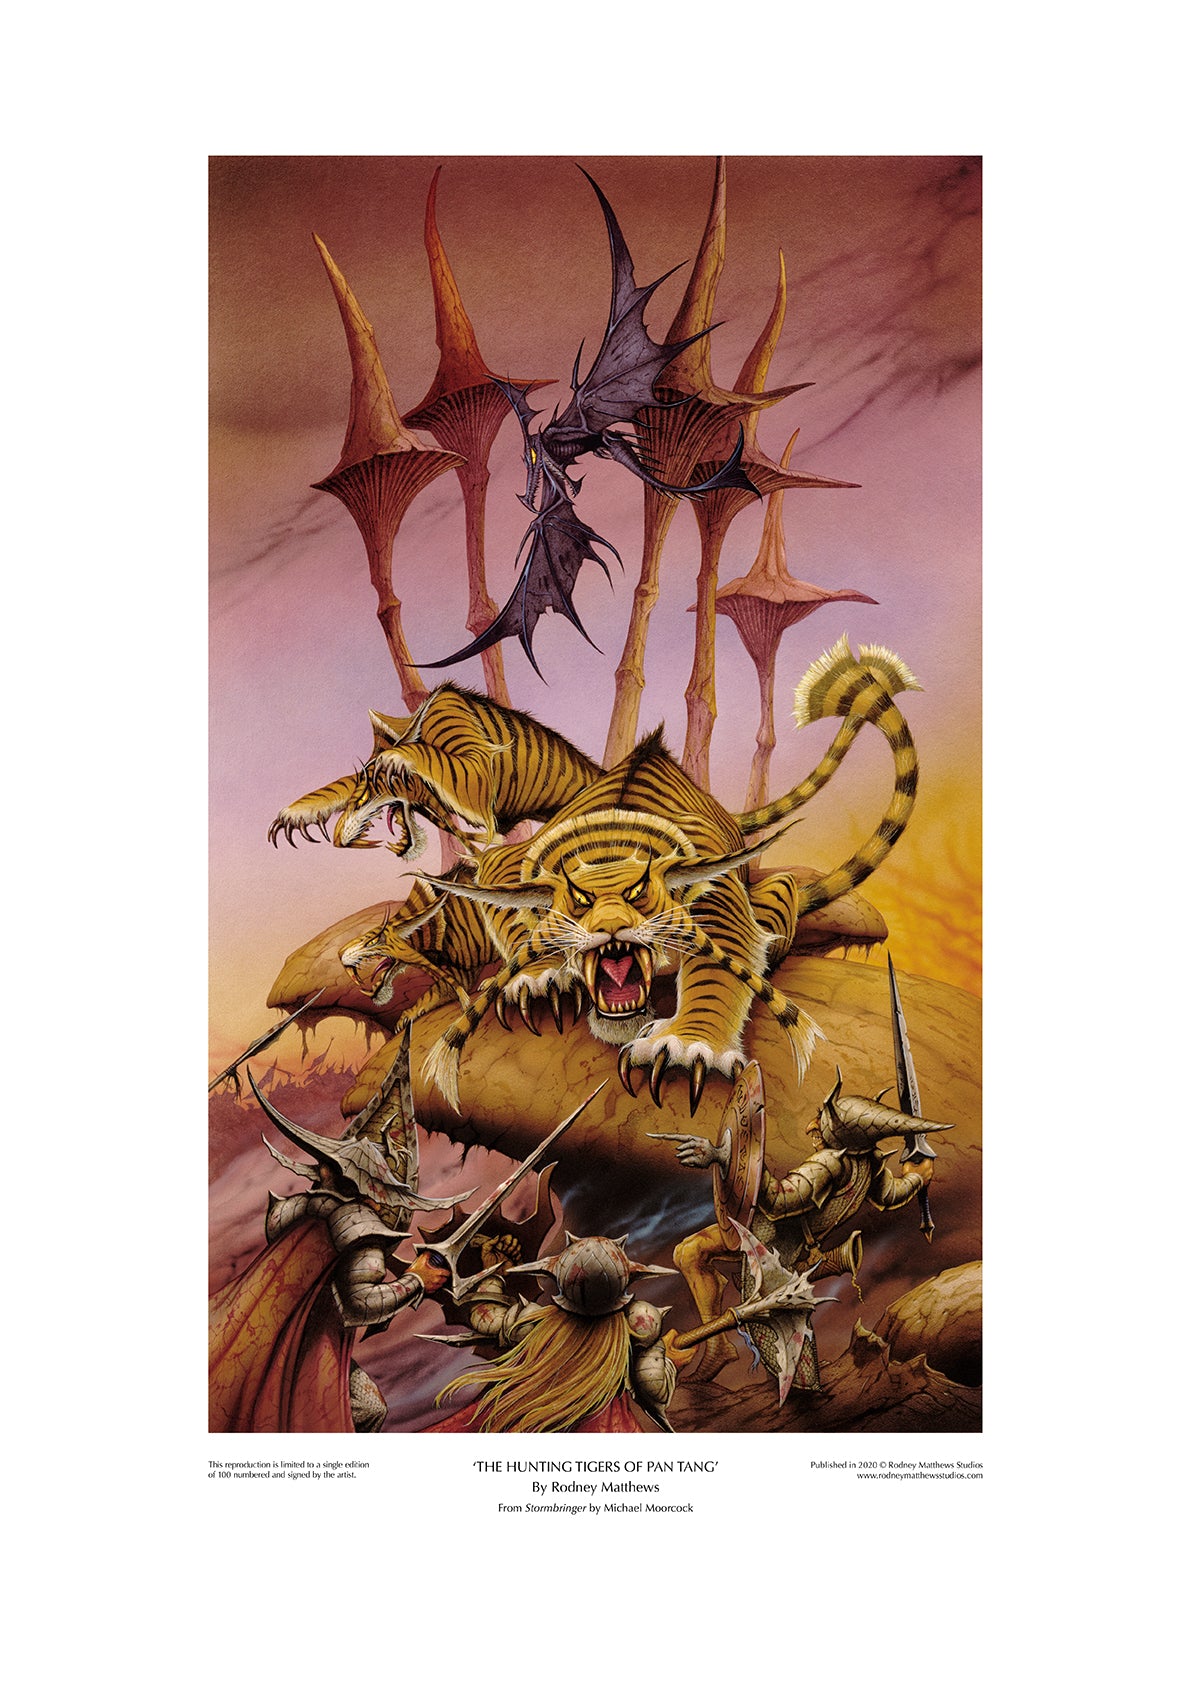 Stormbringer: The Hunting Tigers of Pan Tang limited edition giclèe art print